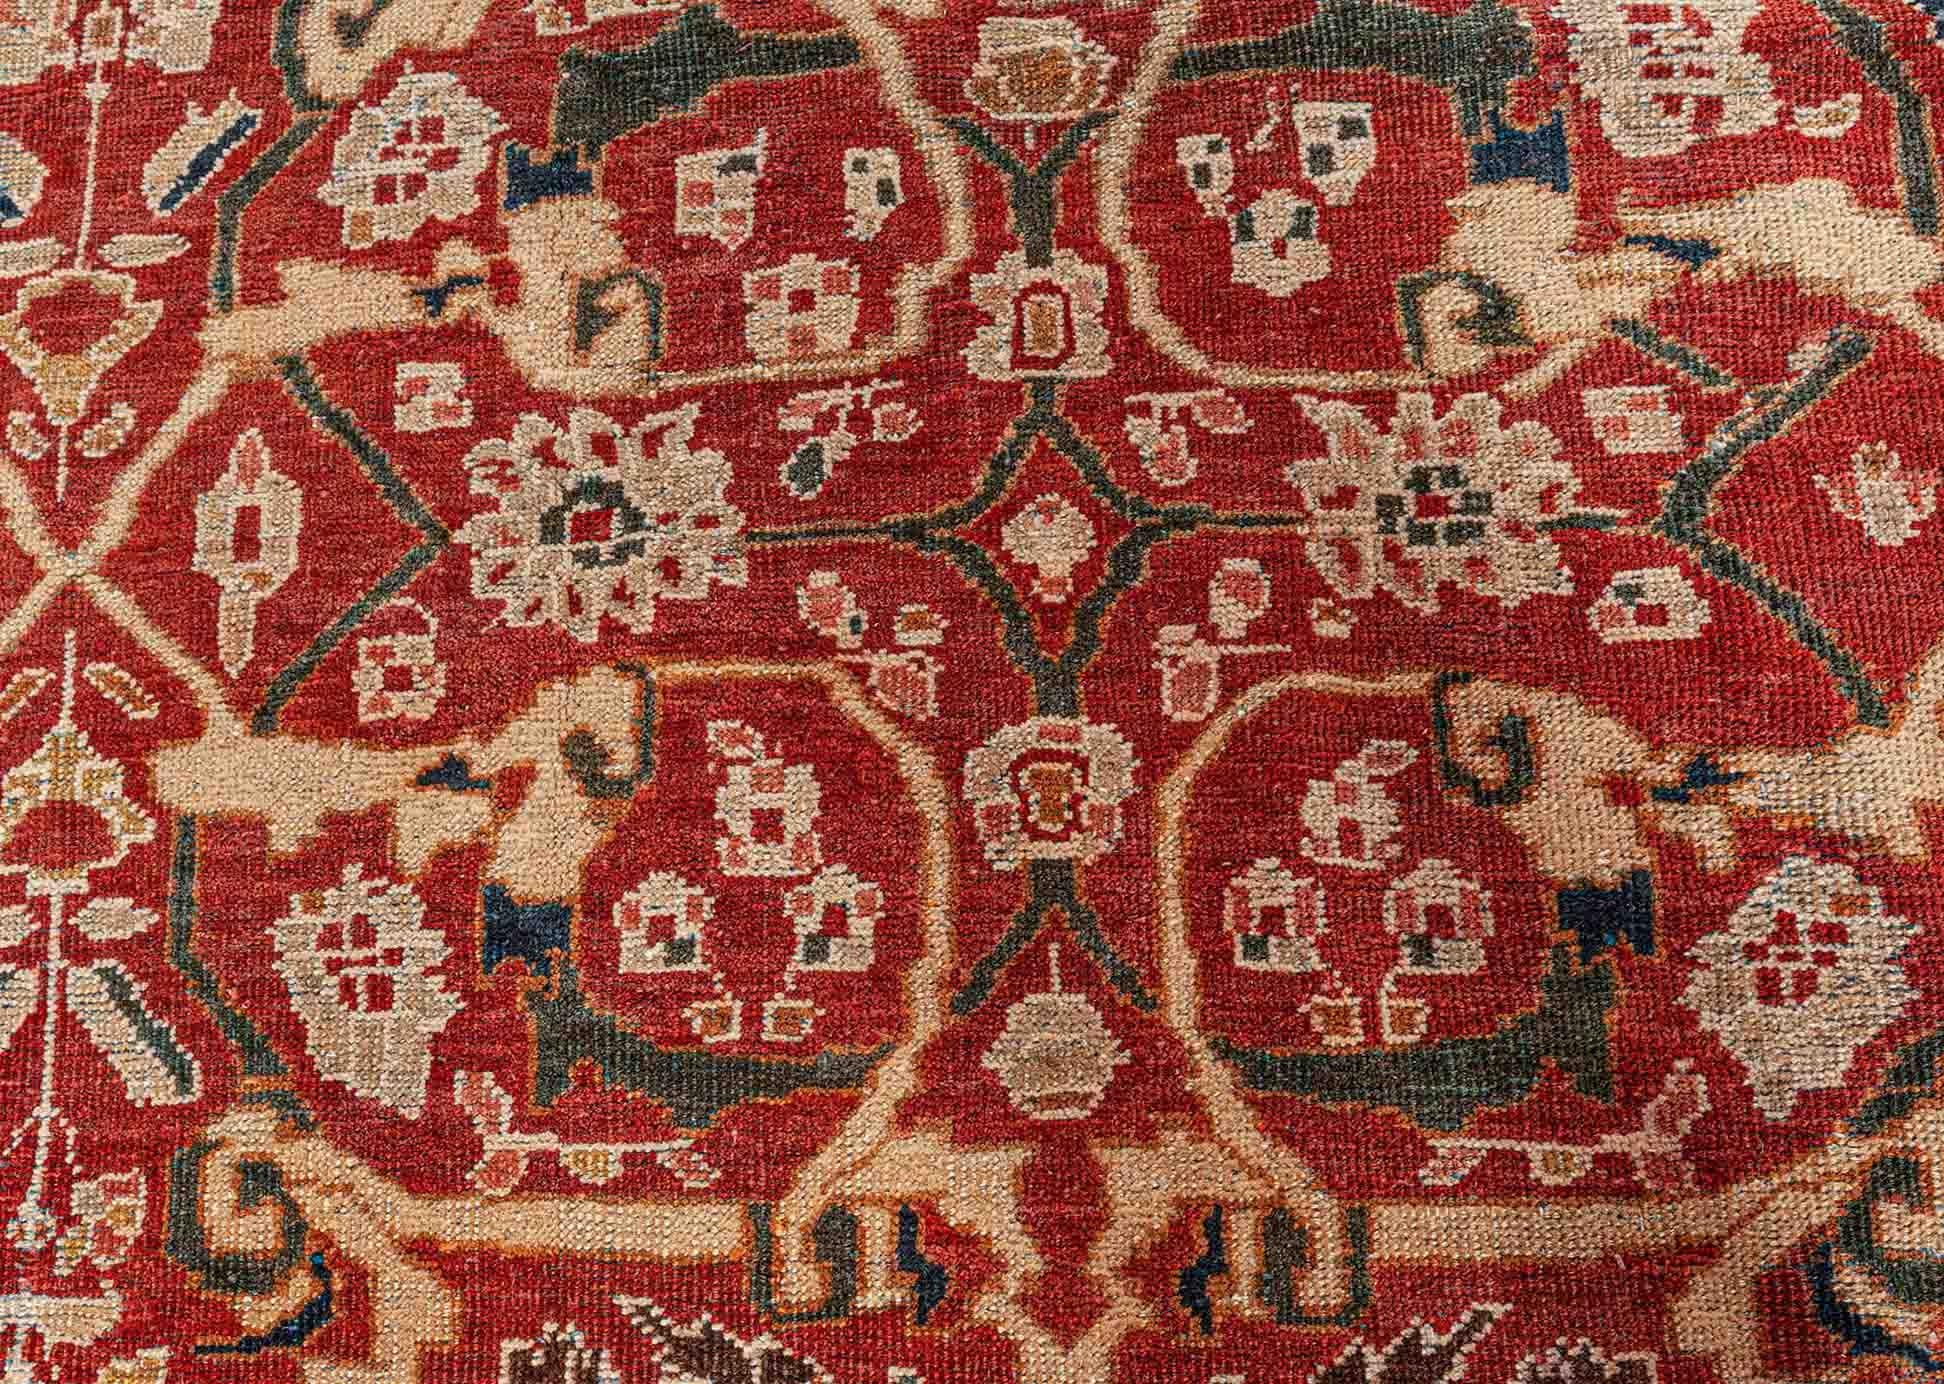 Antique Persian Sultanabad rug
Size: 13'6